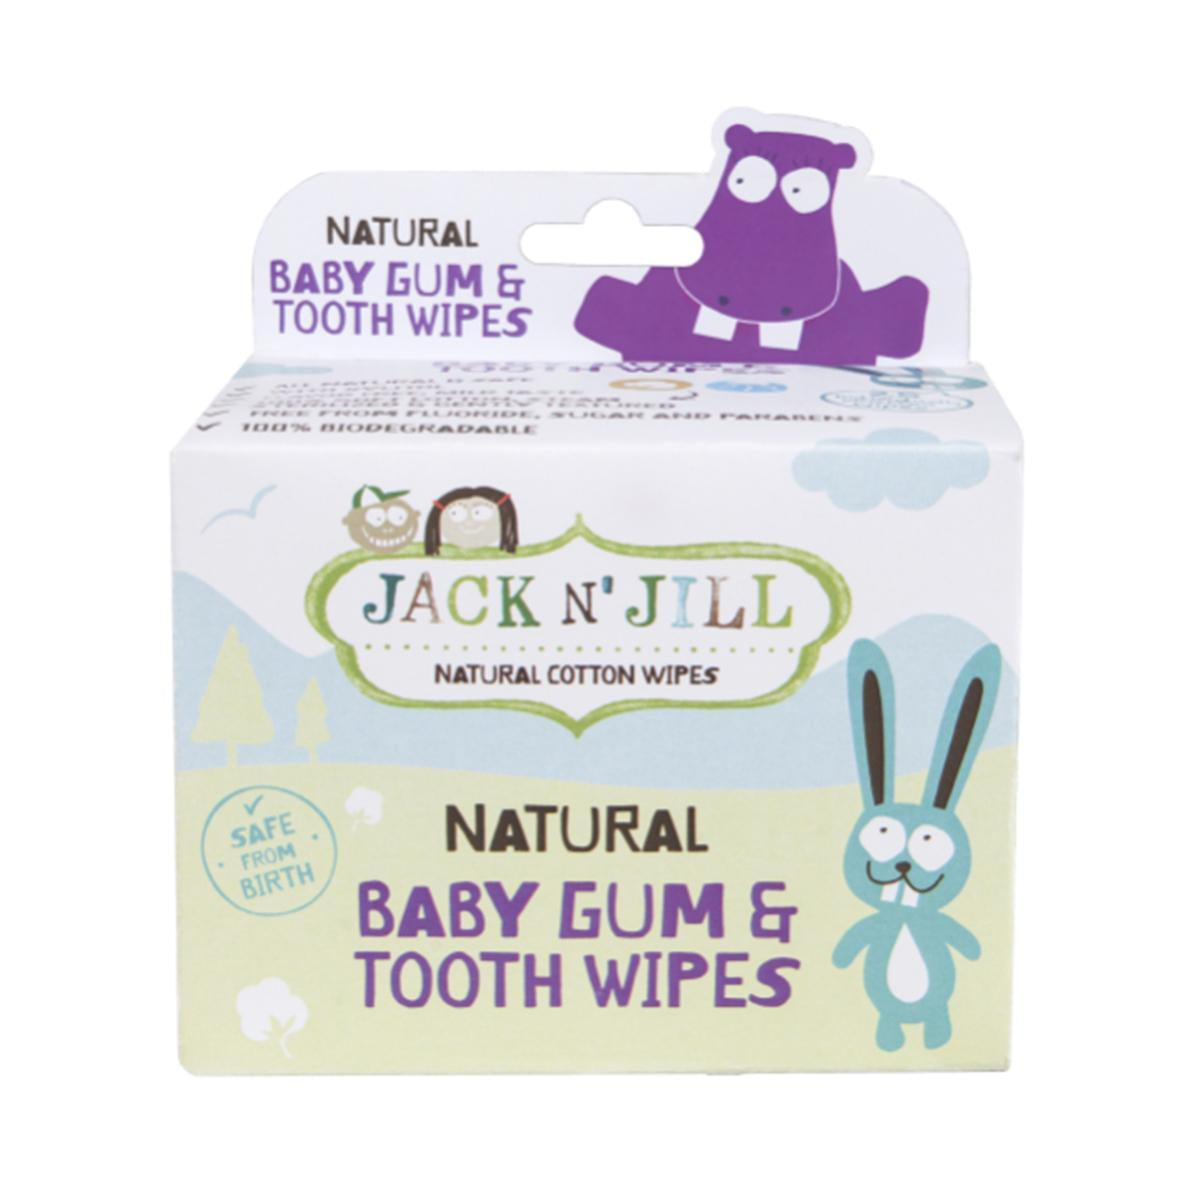 Primary image of Baby Gum and Tooth Wipes